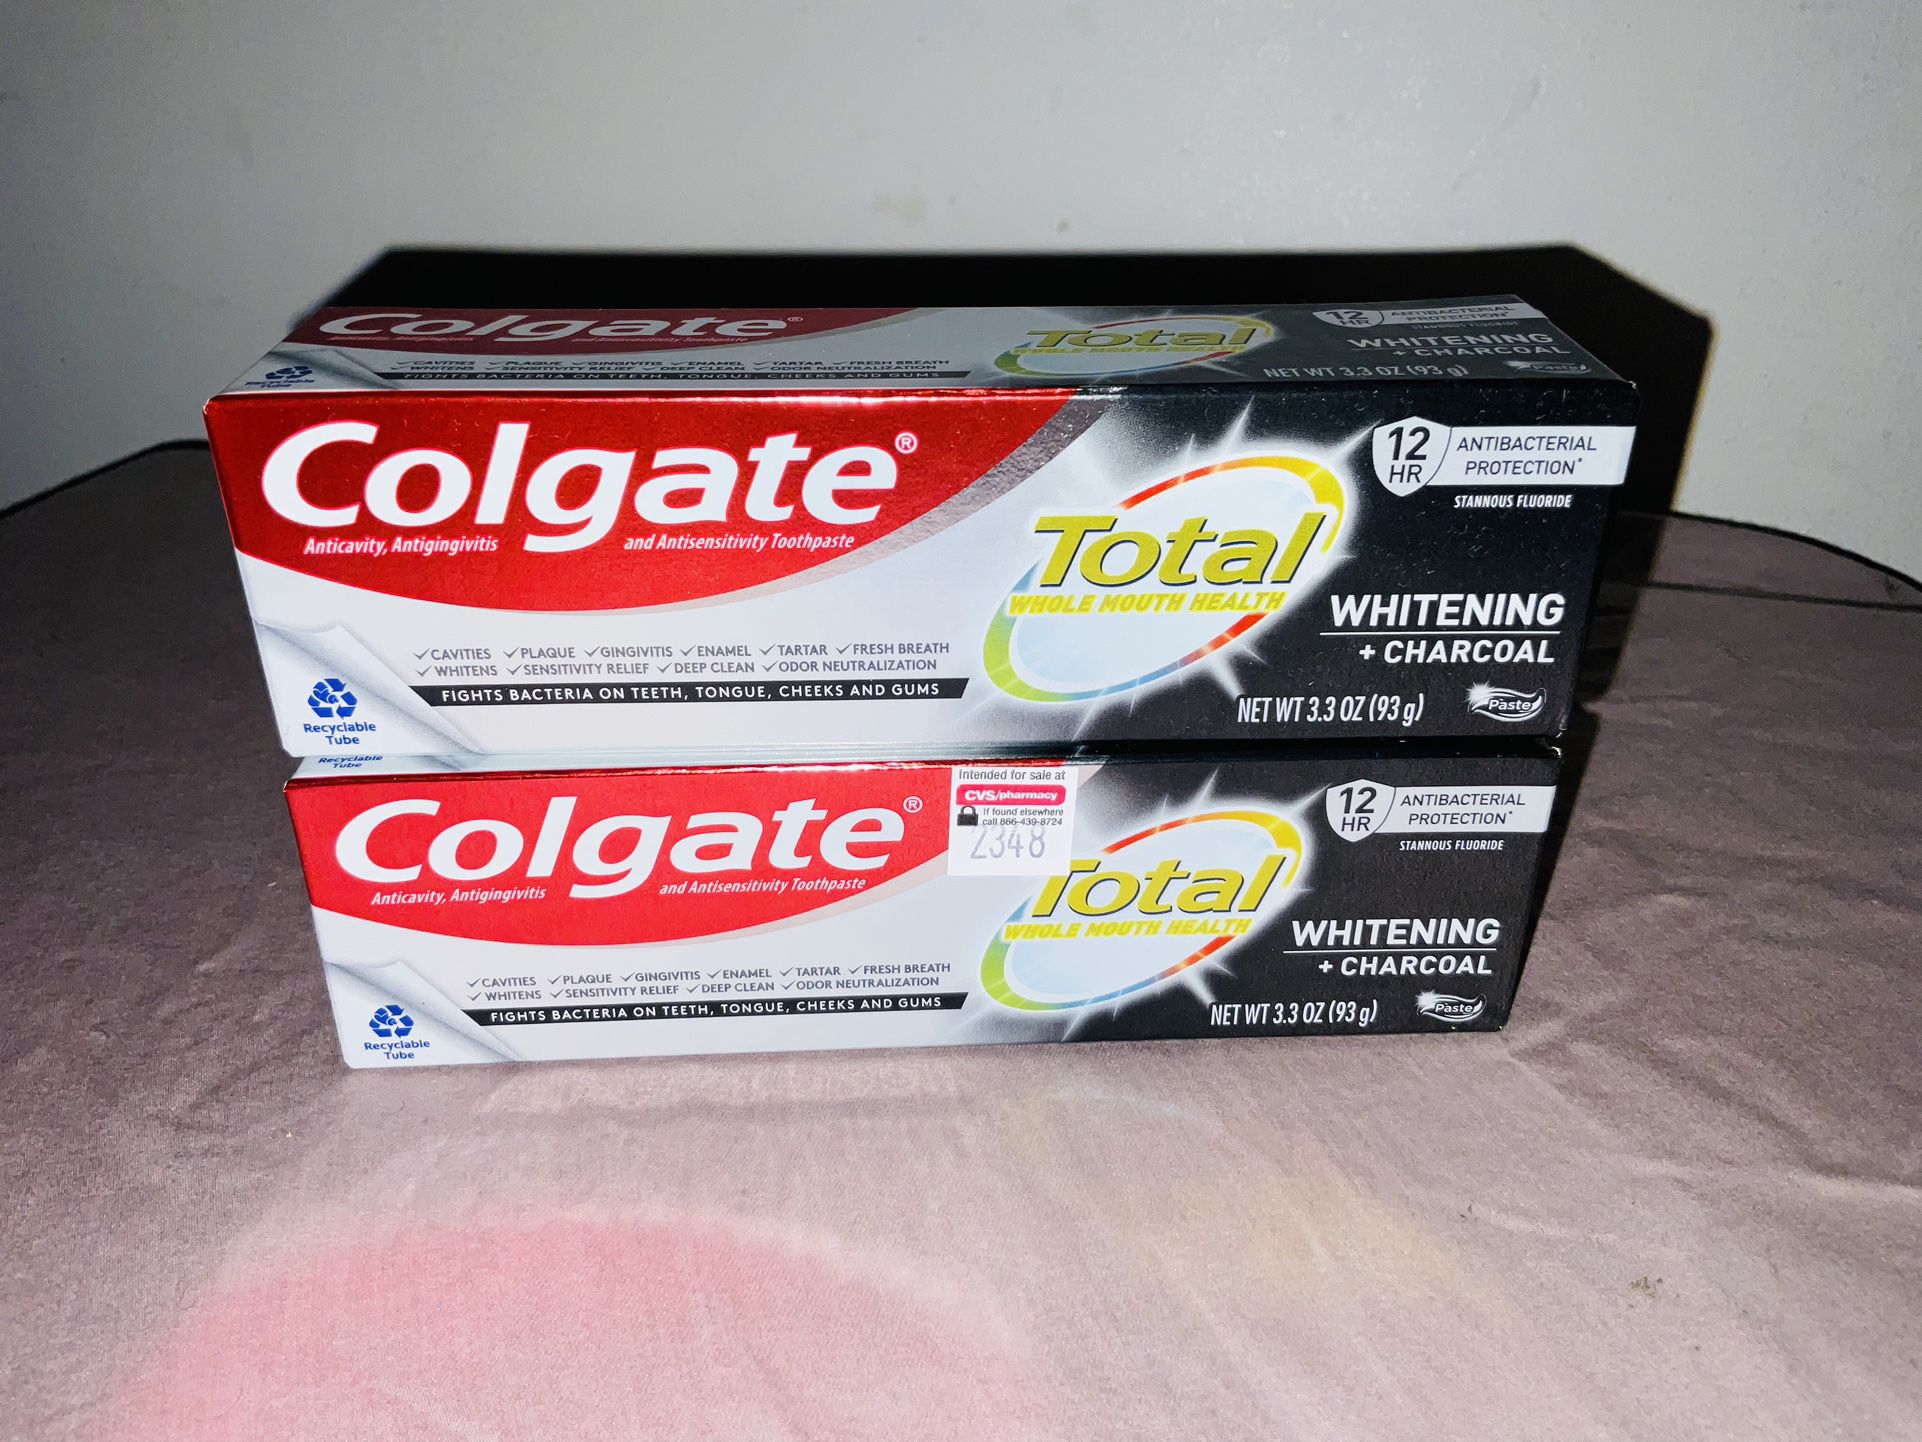 Colgate Total Whitening + Charcoal